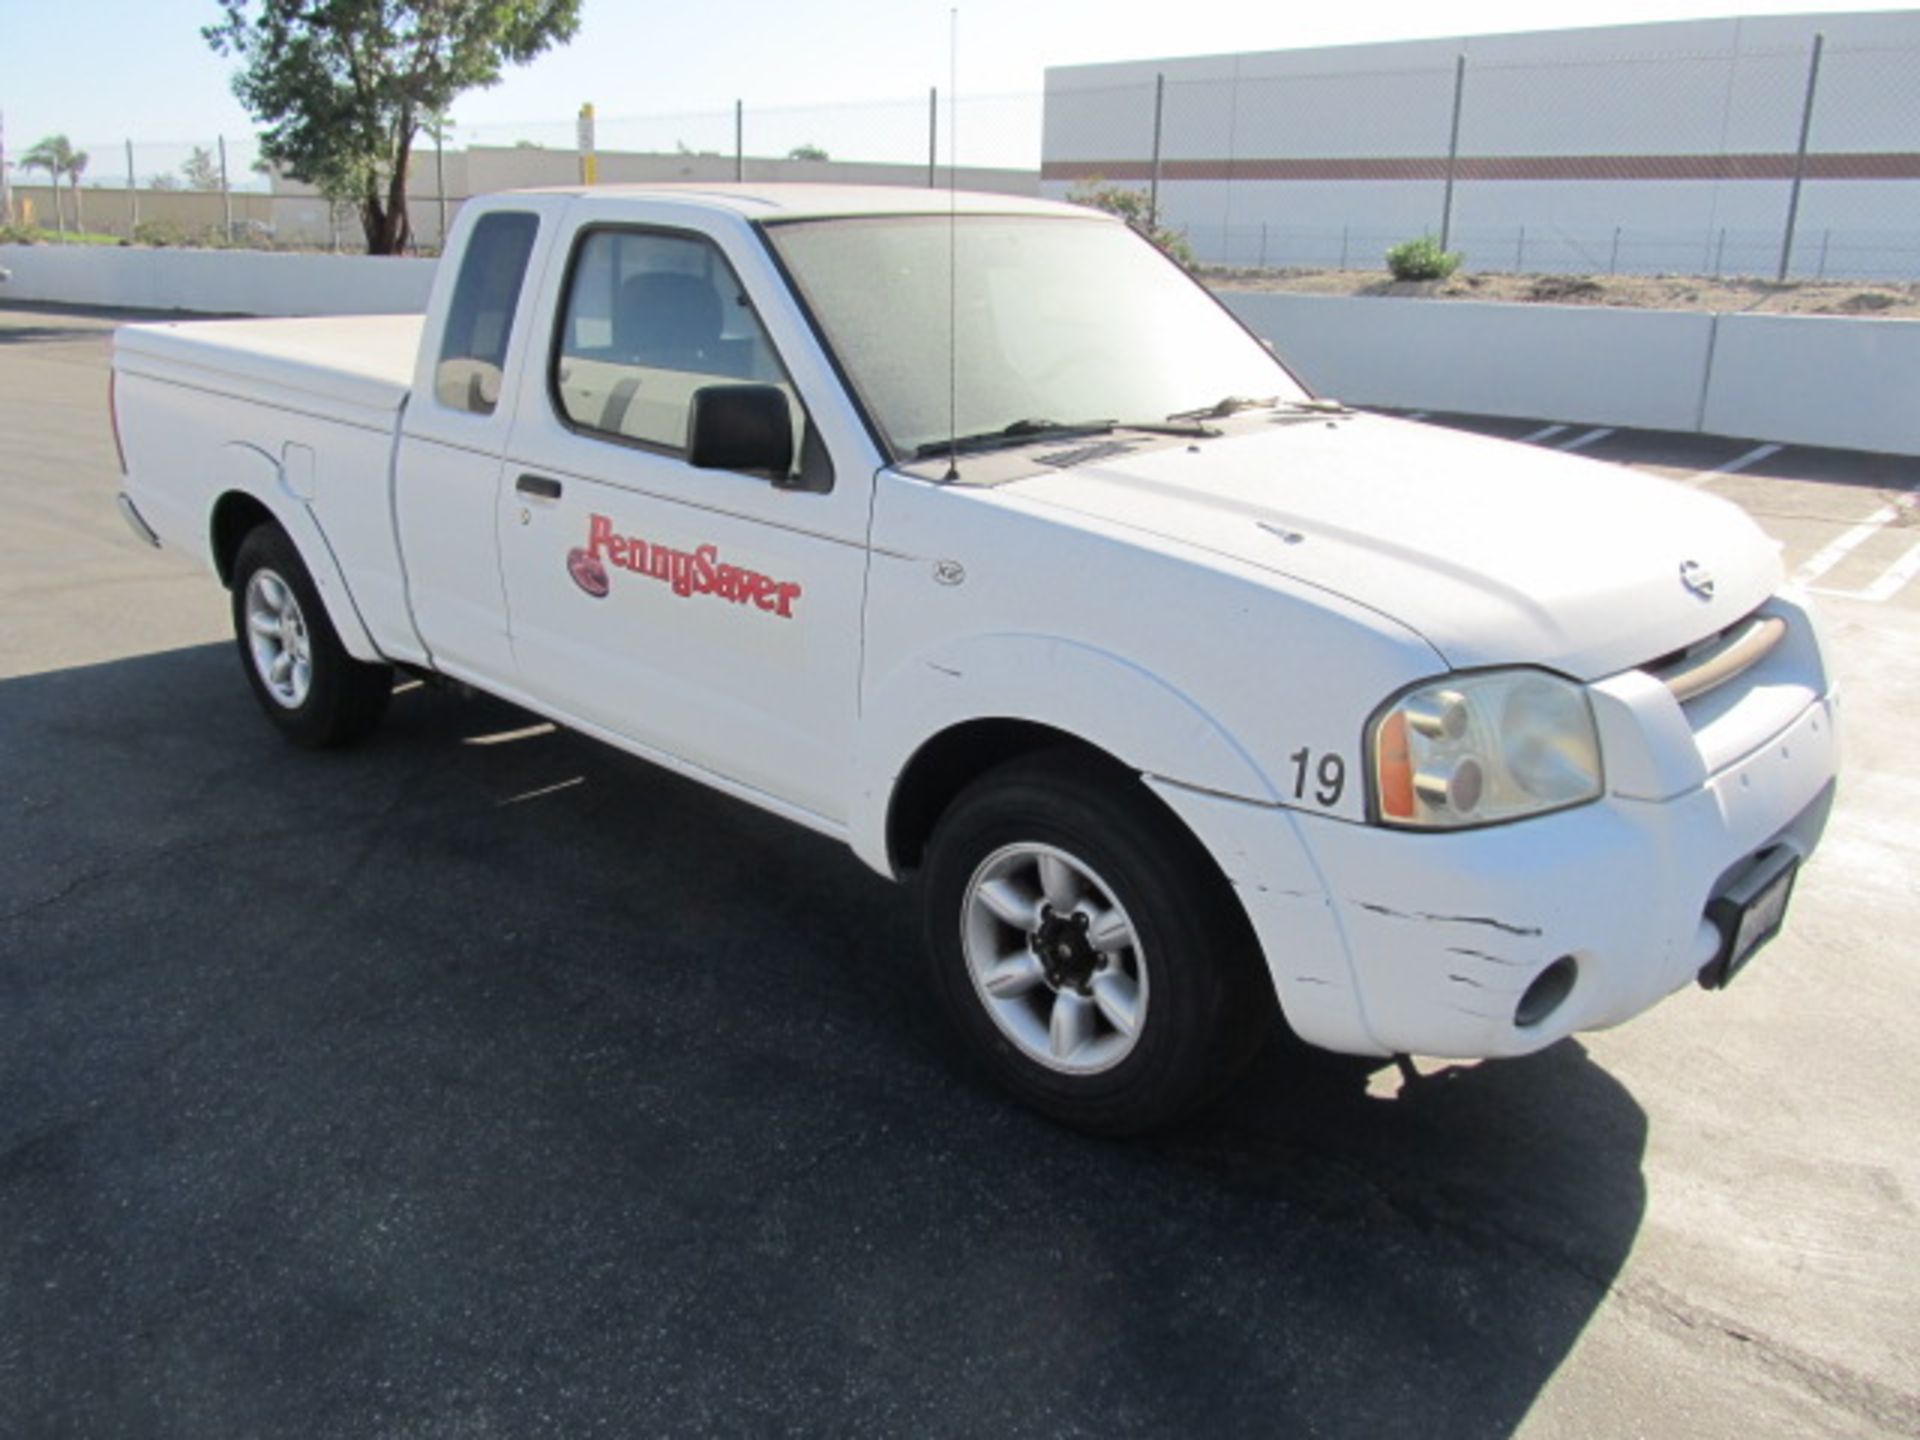 2001 Nissan Frontier XE Pick Up Truck With 4 Cylinder Twin Cam 16 Valve Engine, 5 Speed Manual - Image 3 of 8